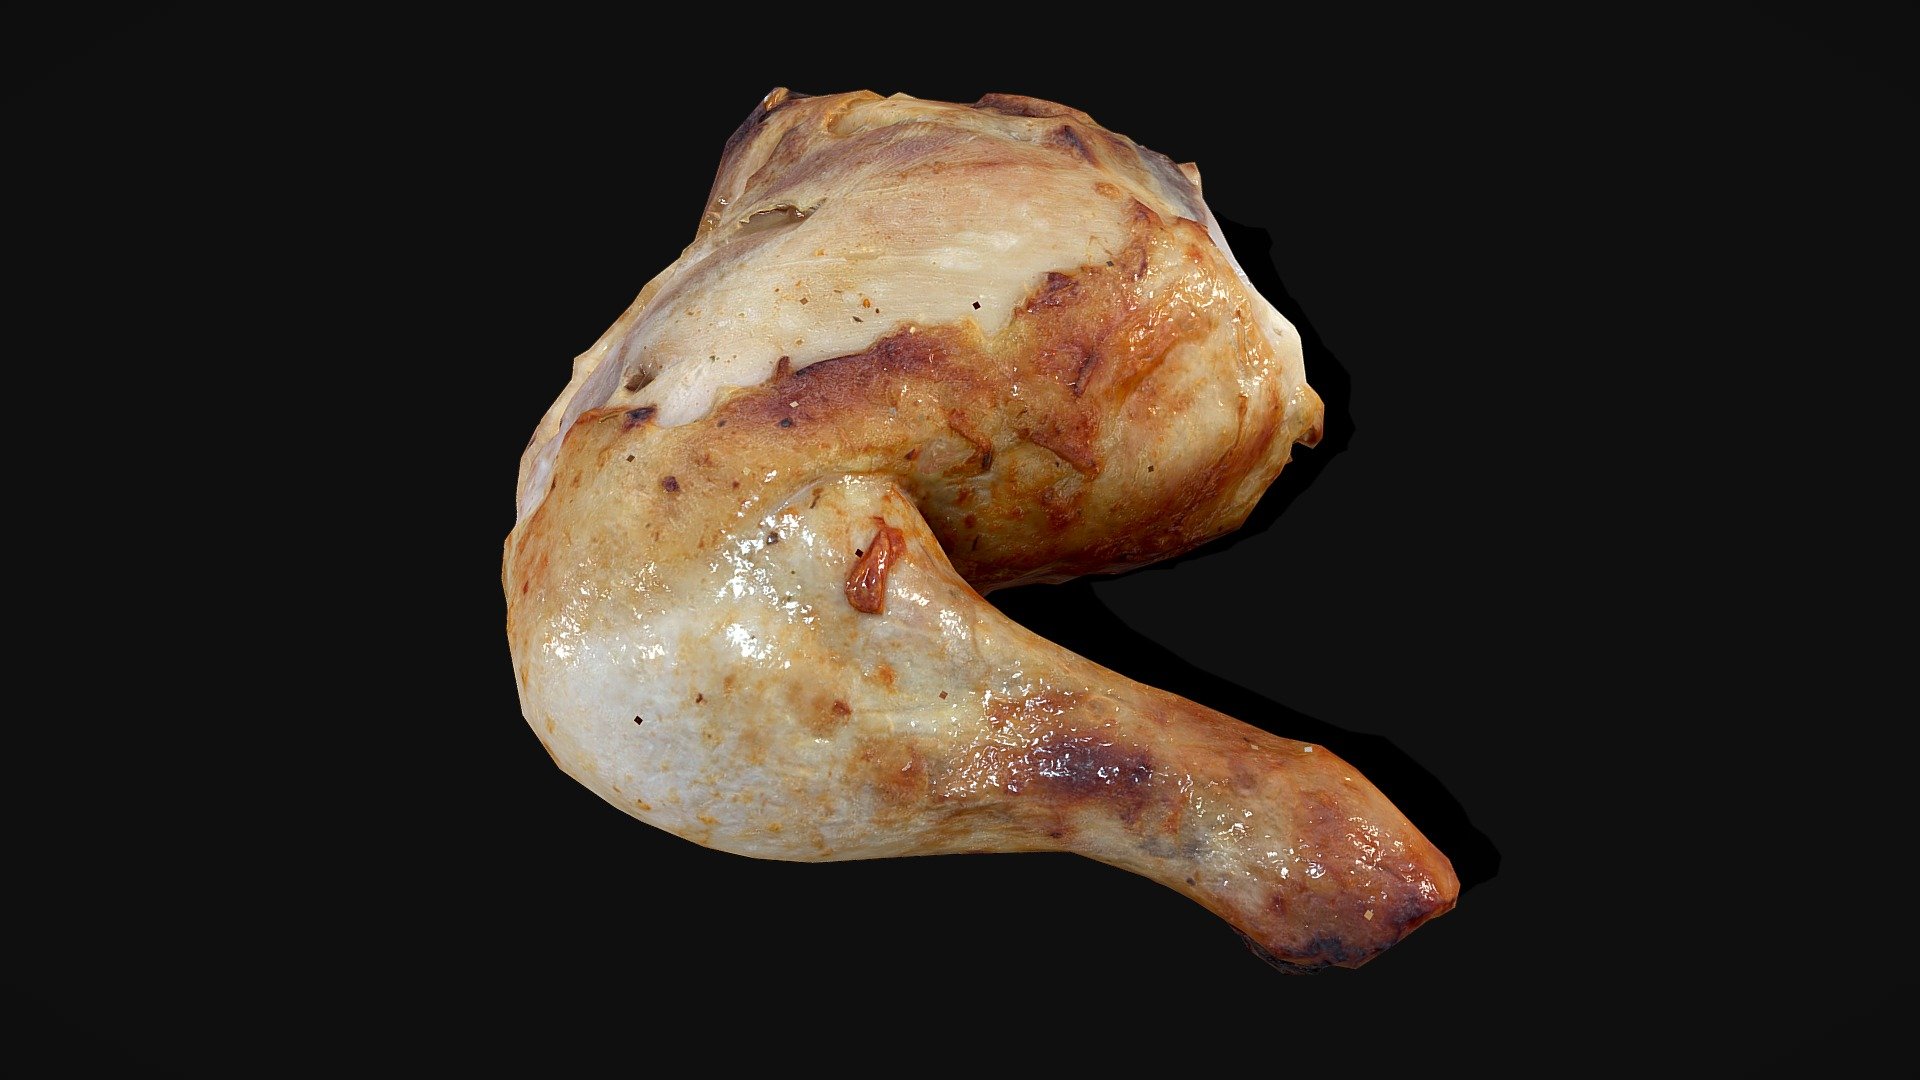 Photoscaned Chicken Leg - Photoscaned low poly model. The model is ready for your game. Can be used as an environment element 3d model